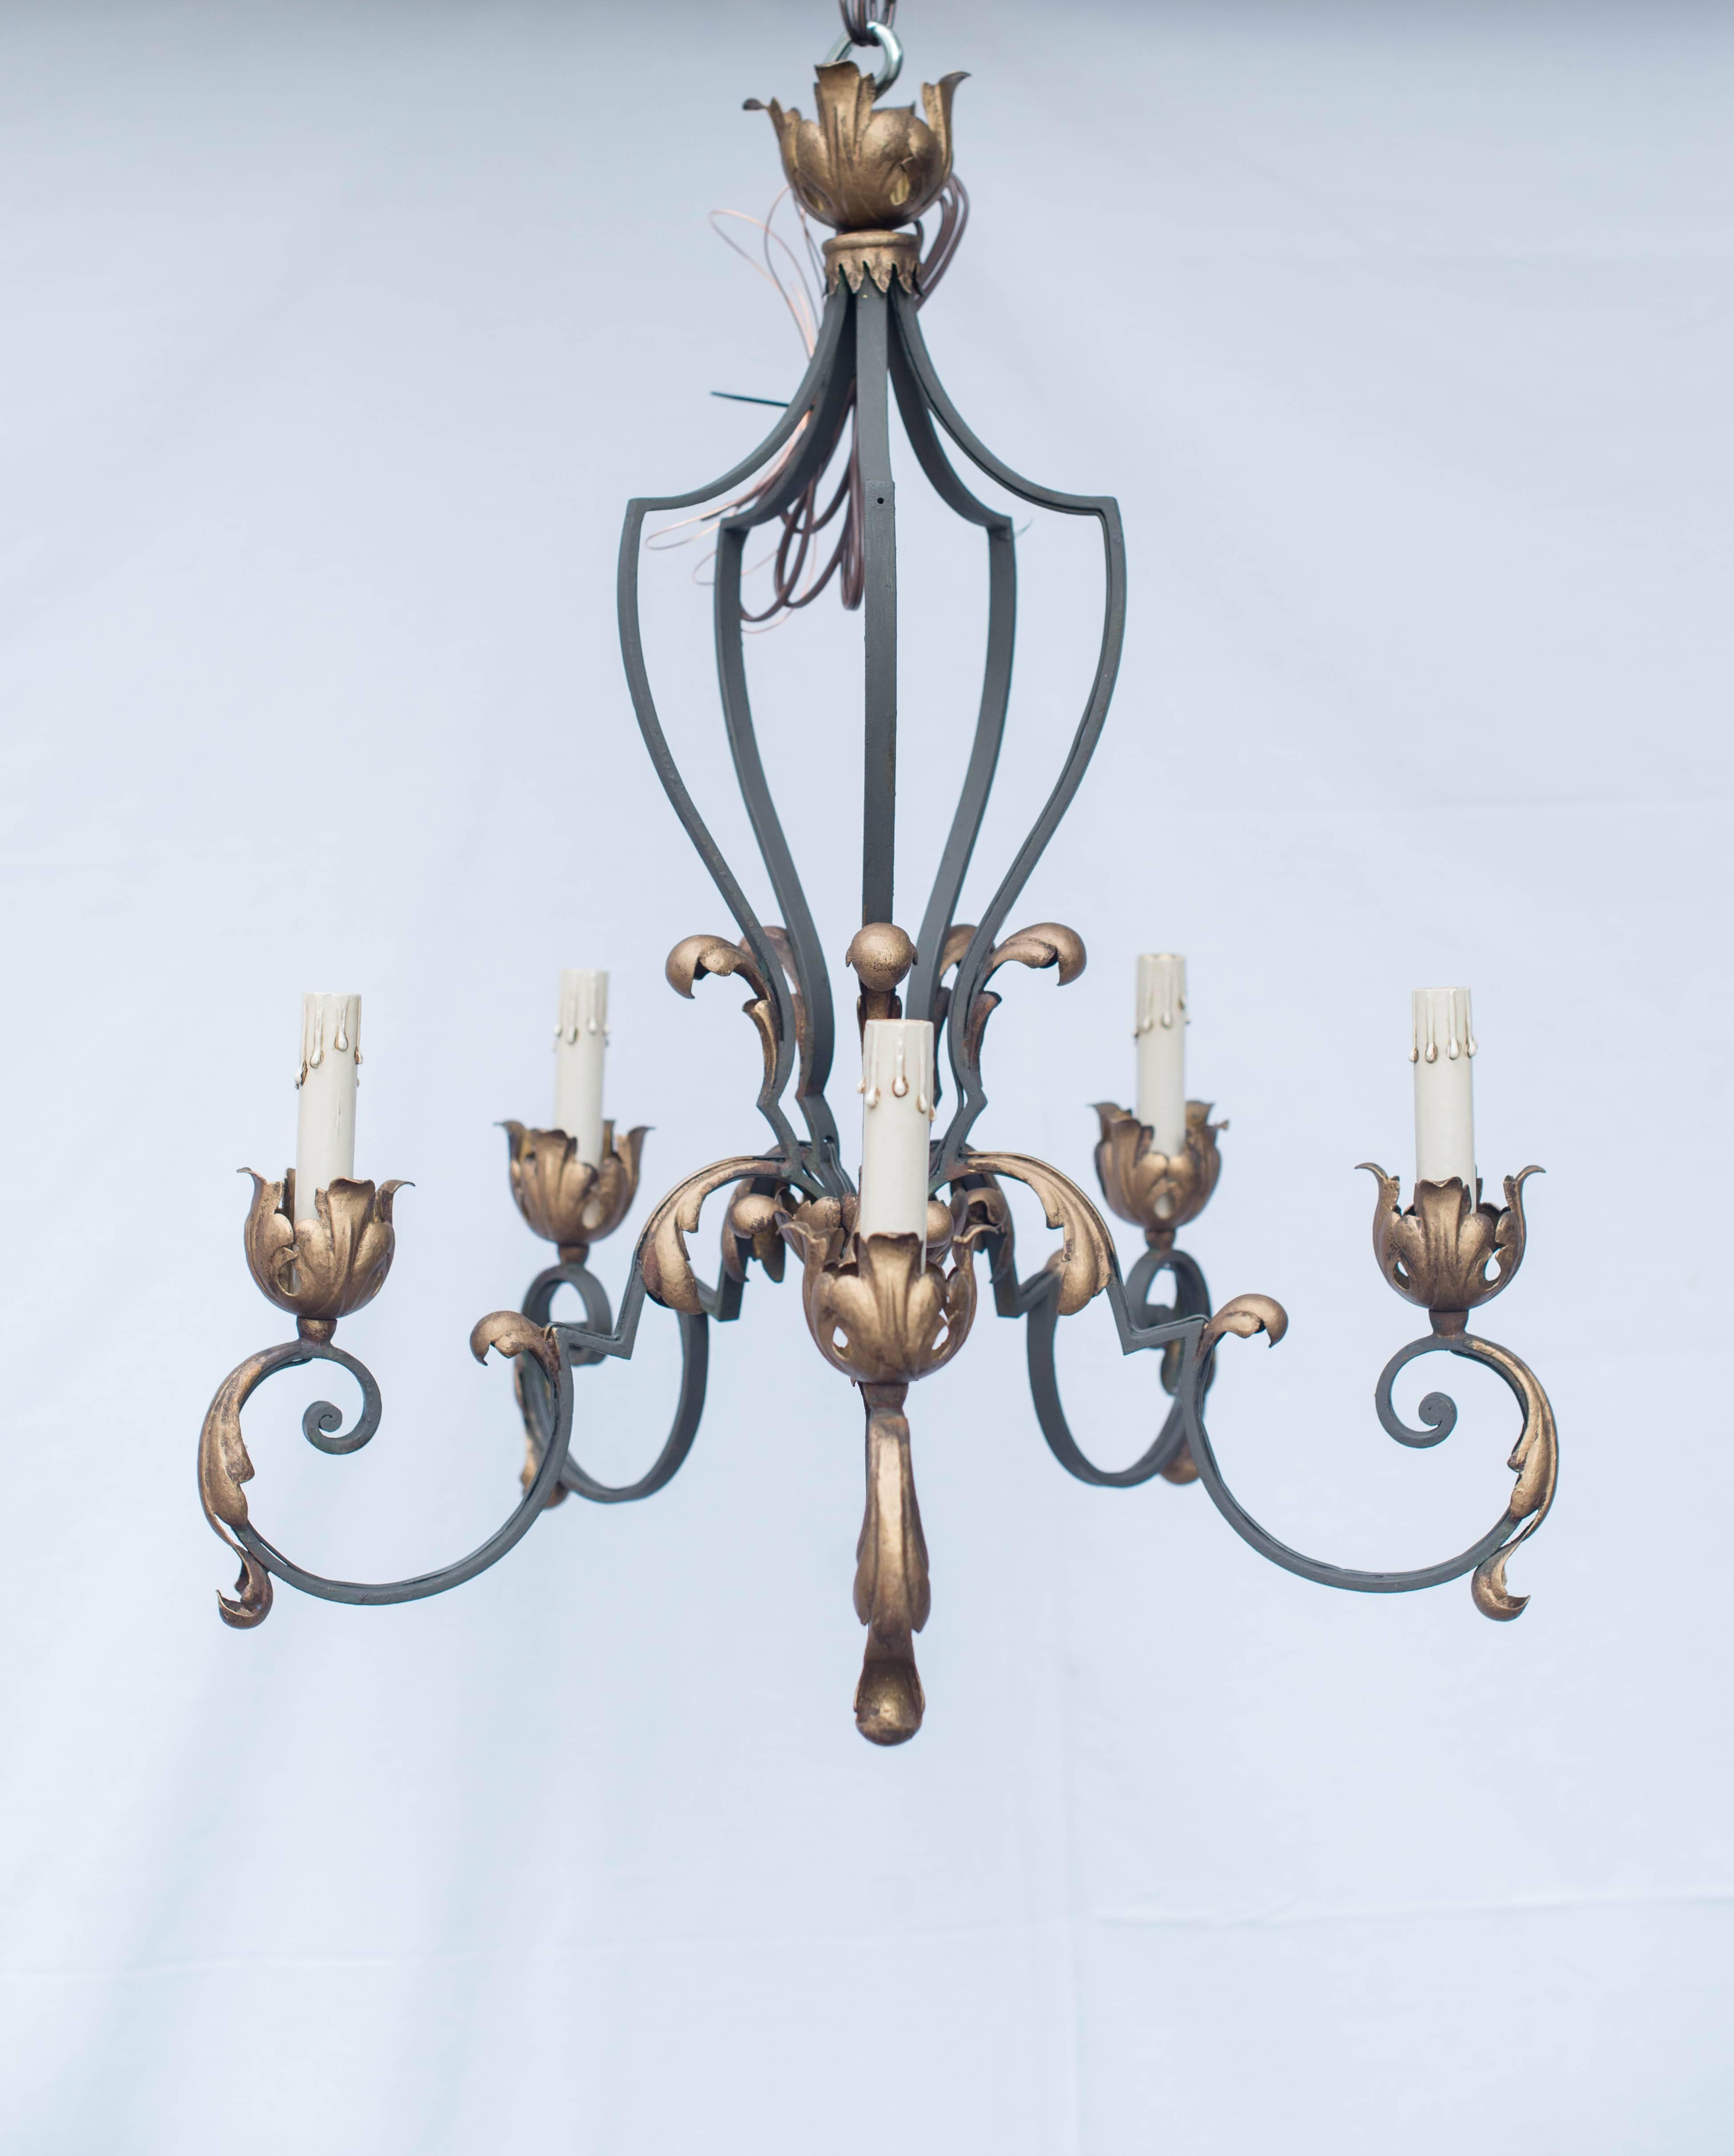 This beautiful early 20th century painted French iron chandelier features six scrolling iron arms adorned with acanthus leaves. The finish is bronze like with touches of gilt on the leaves. This chandelier has been newly rewired for American use.